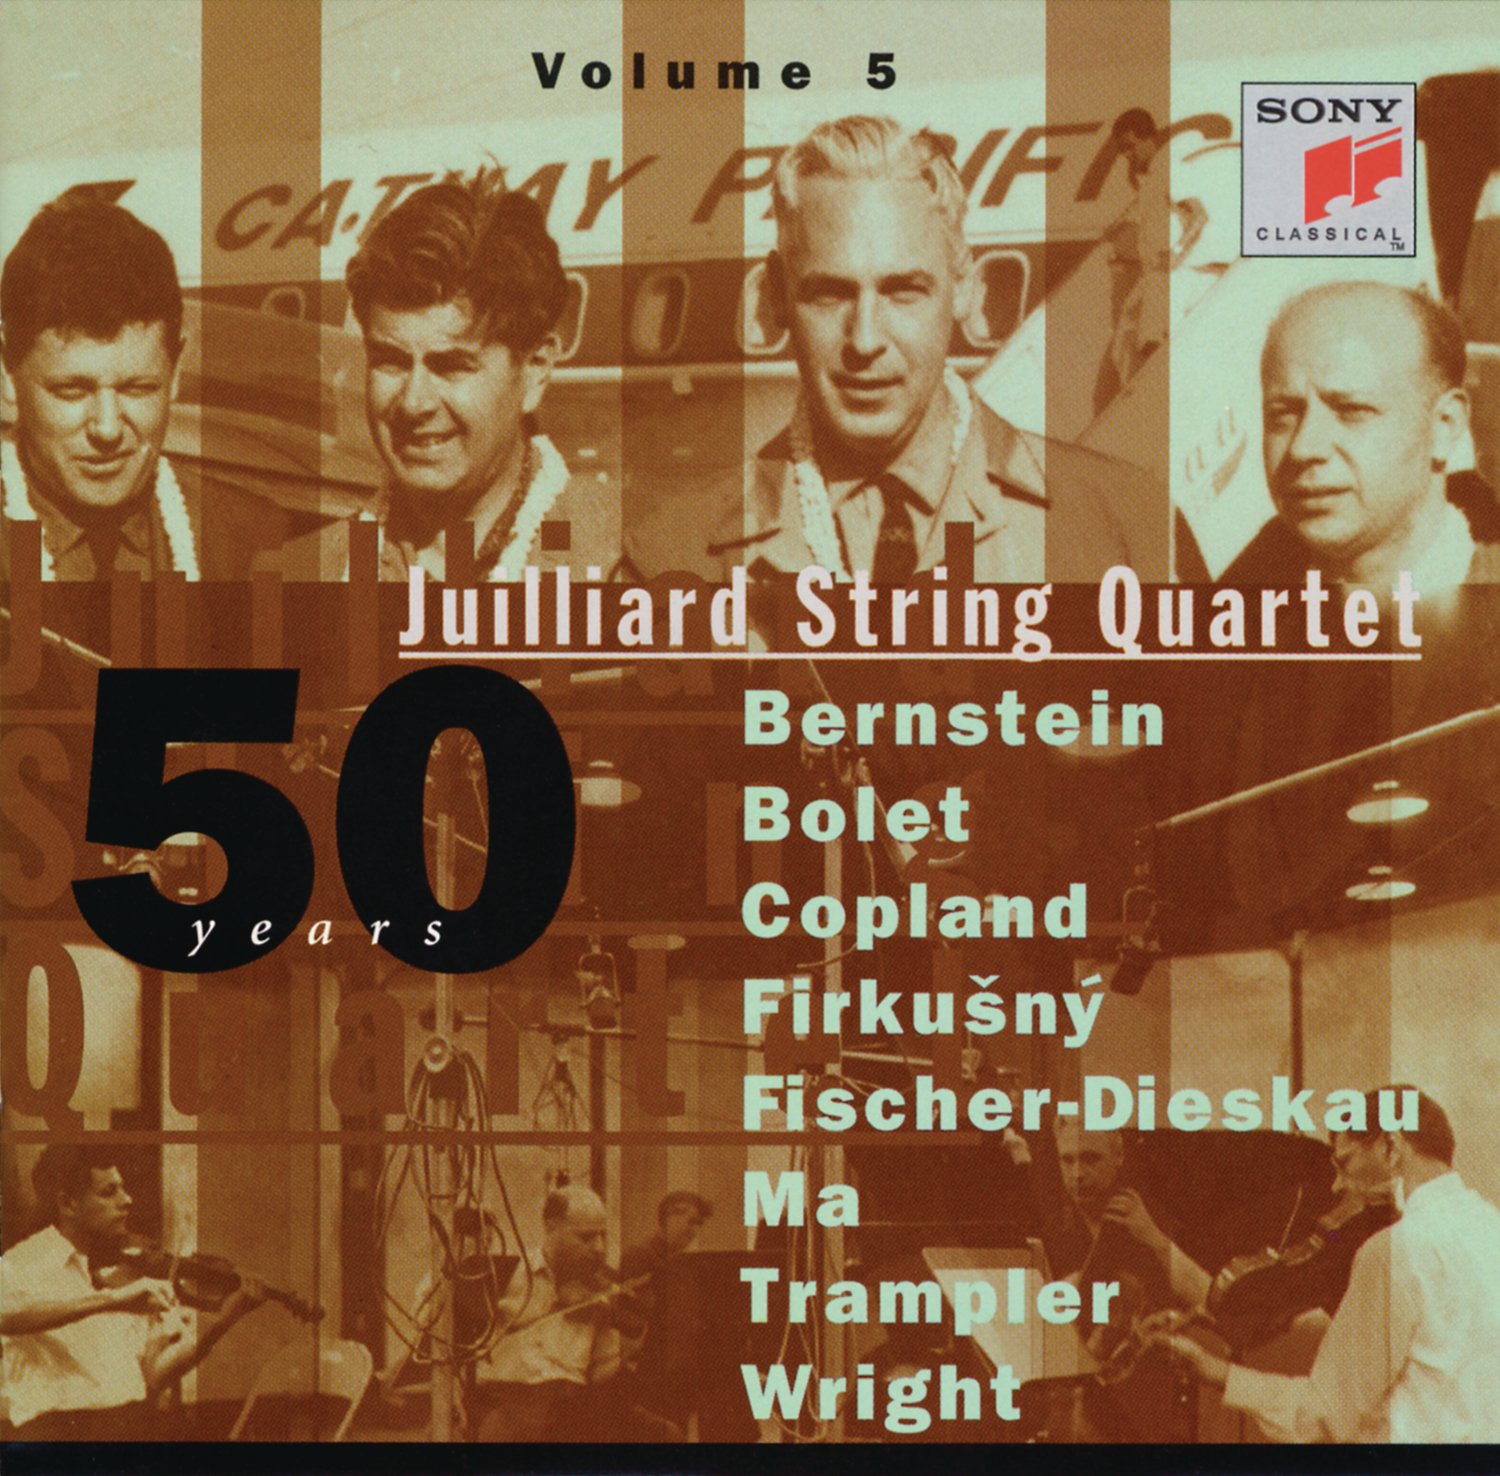 Juilliard String Quartet - Juilliard String Quartet: Great Collaborations